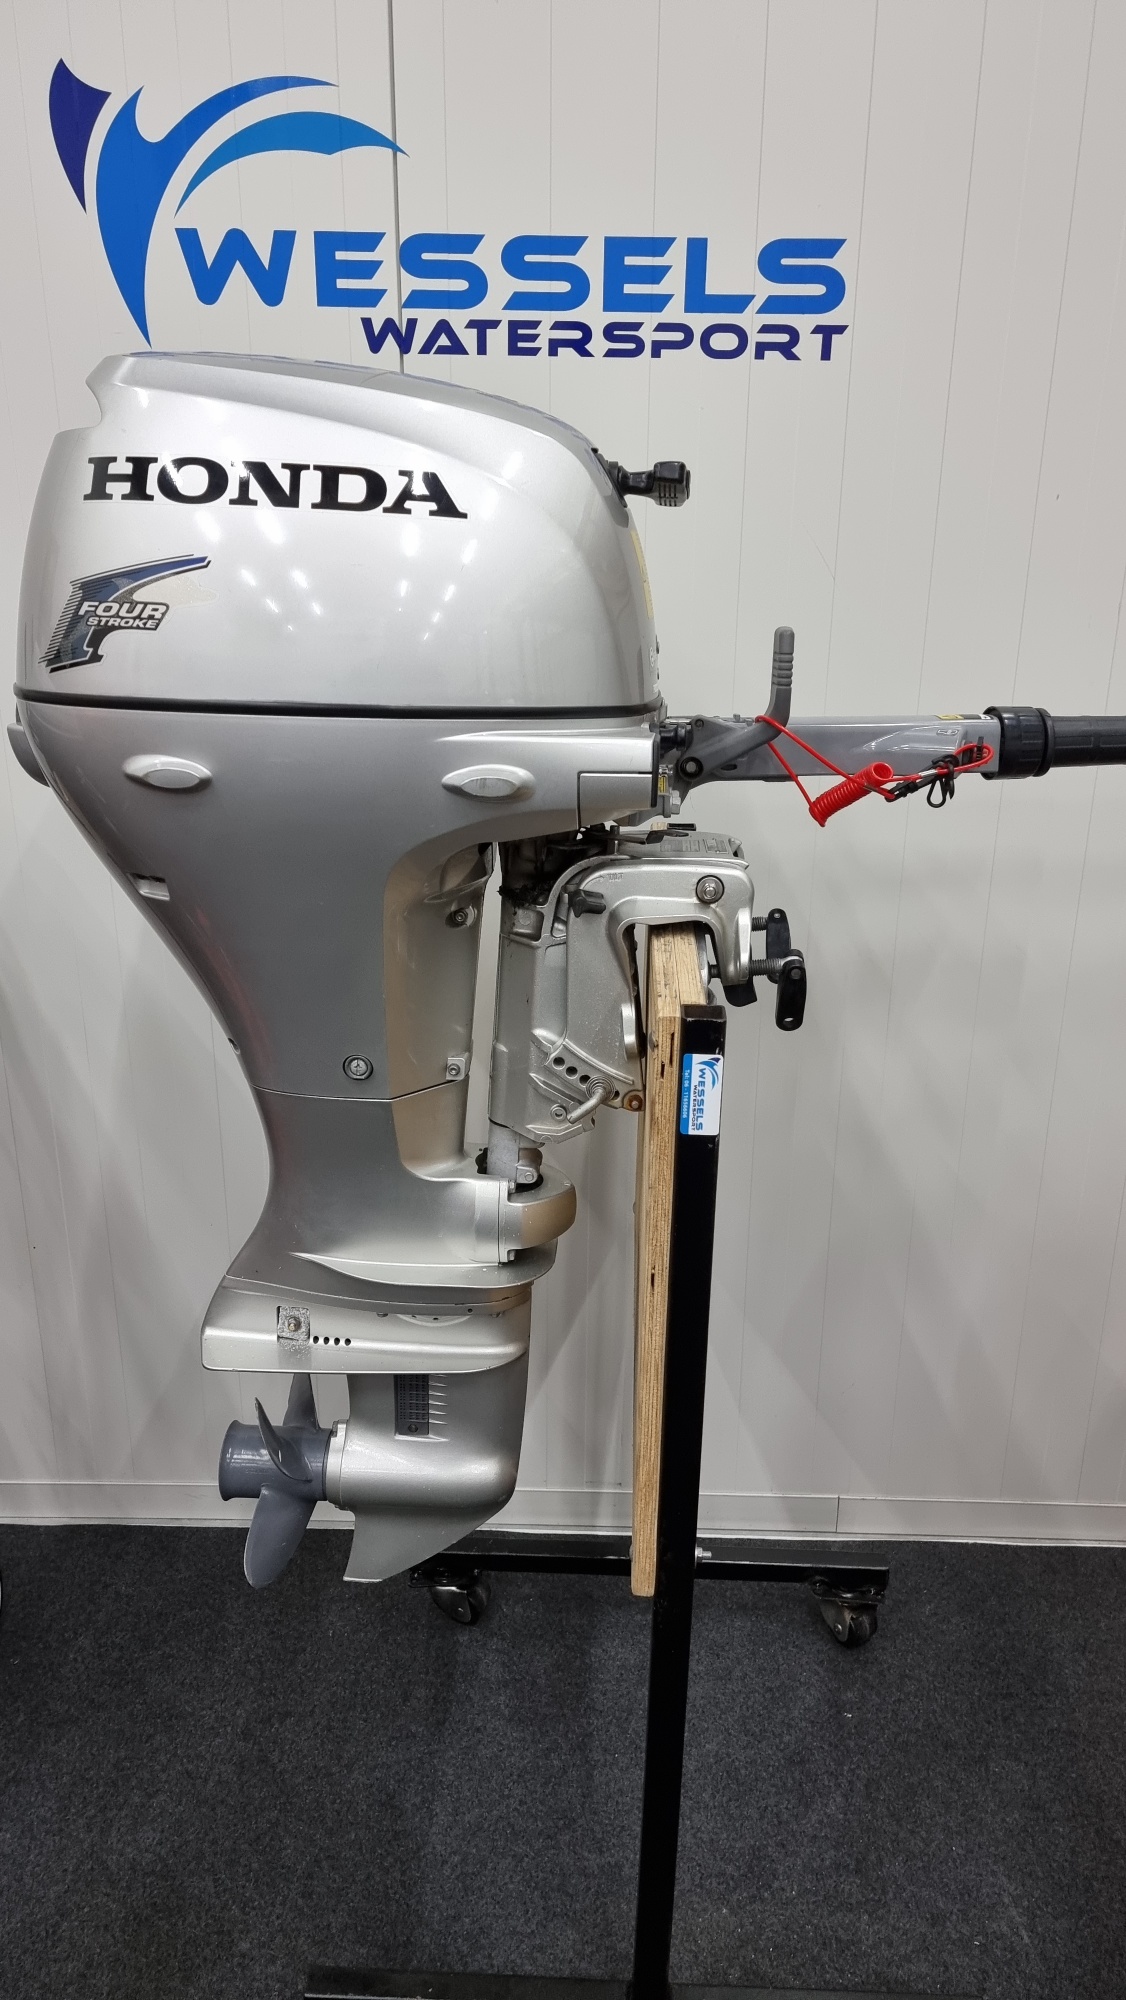 Honda BF 15 S | Wessels Watersport | 20211227 145000 resized